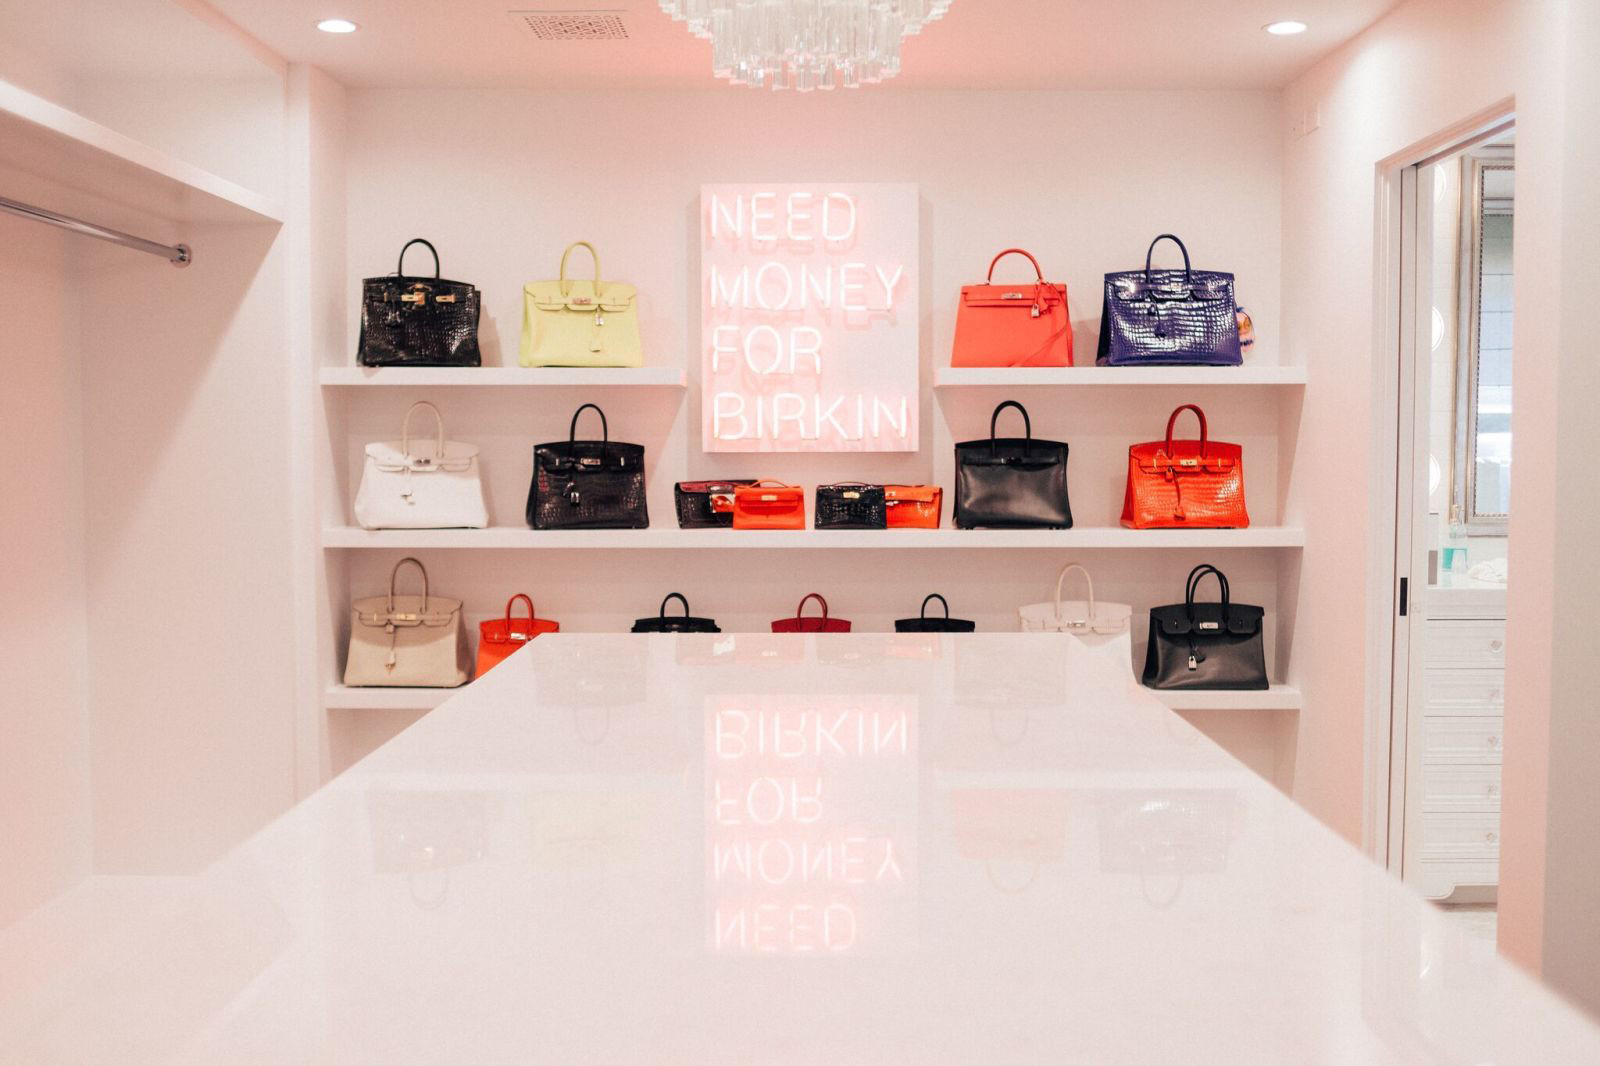 Kris Jenner Has A Closet Just for Her 